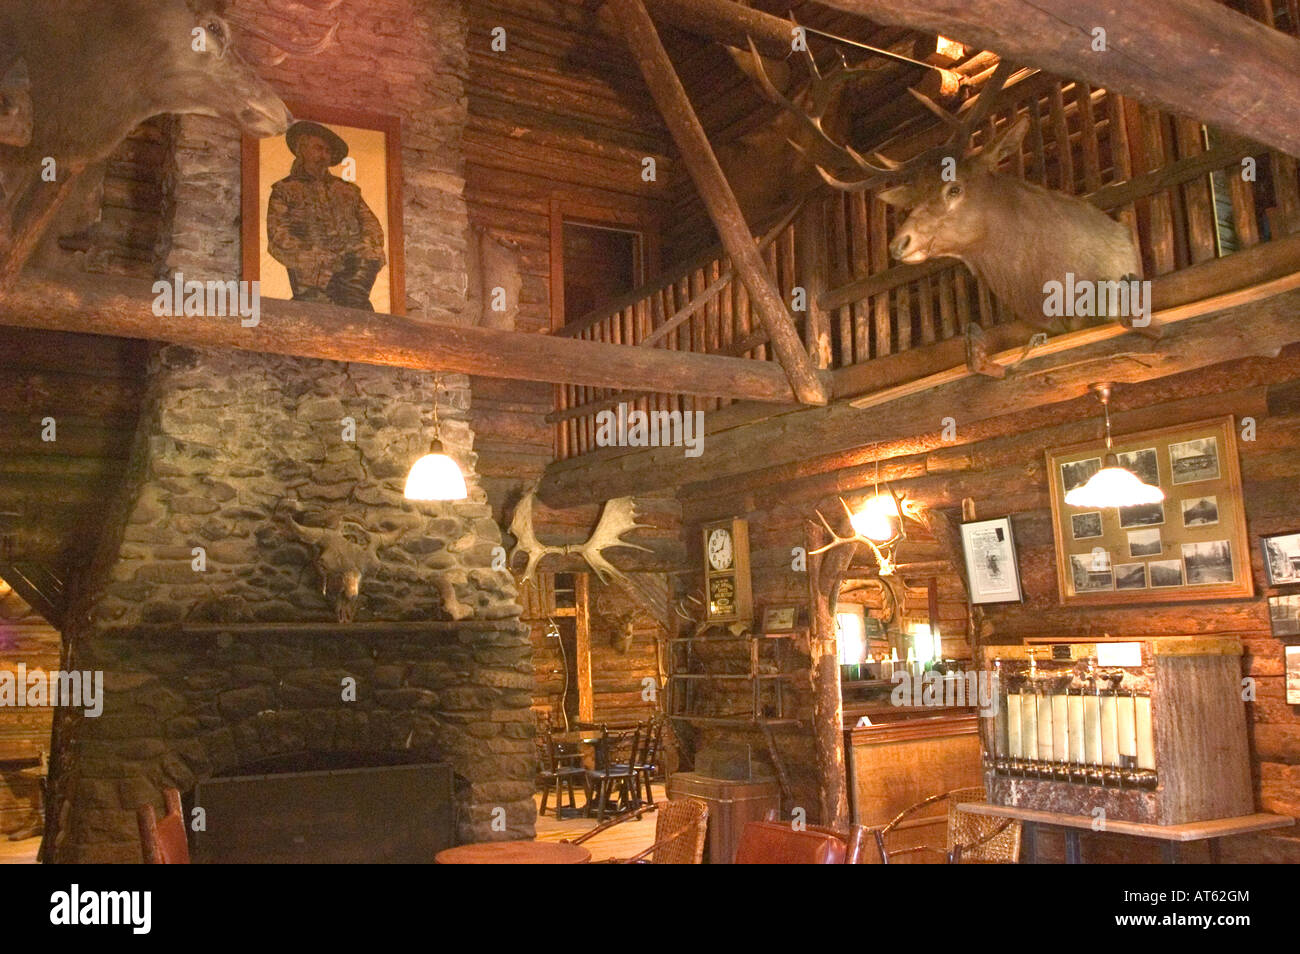 Bill's hunting lodge, Tepee, is a log cabin accommodation not far Cody, WY Stock Photo - Alamy